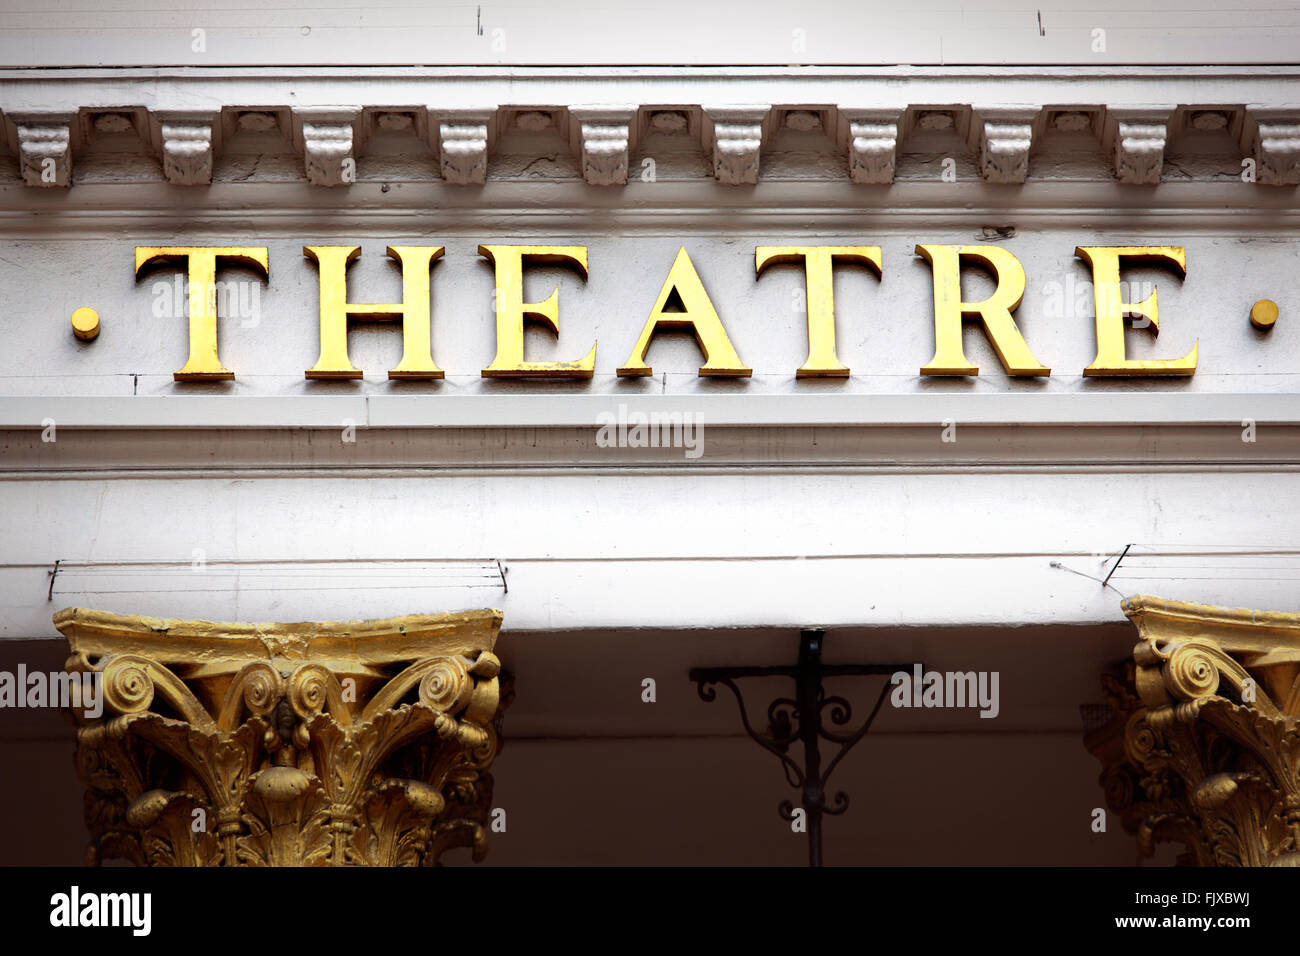 Old theatre sign and facade in gold and white. Stock Photo